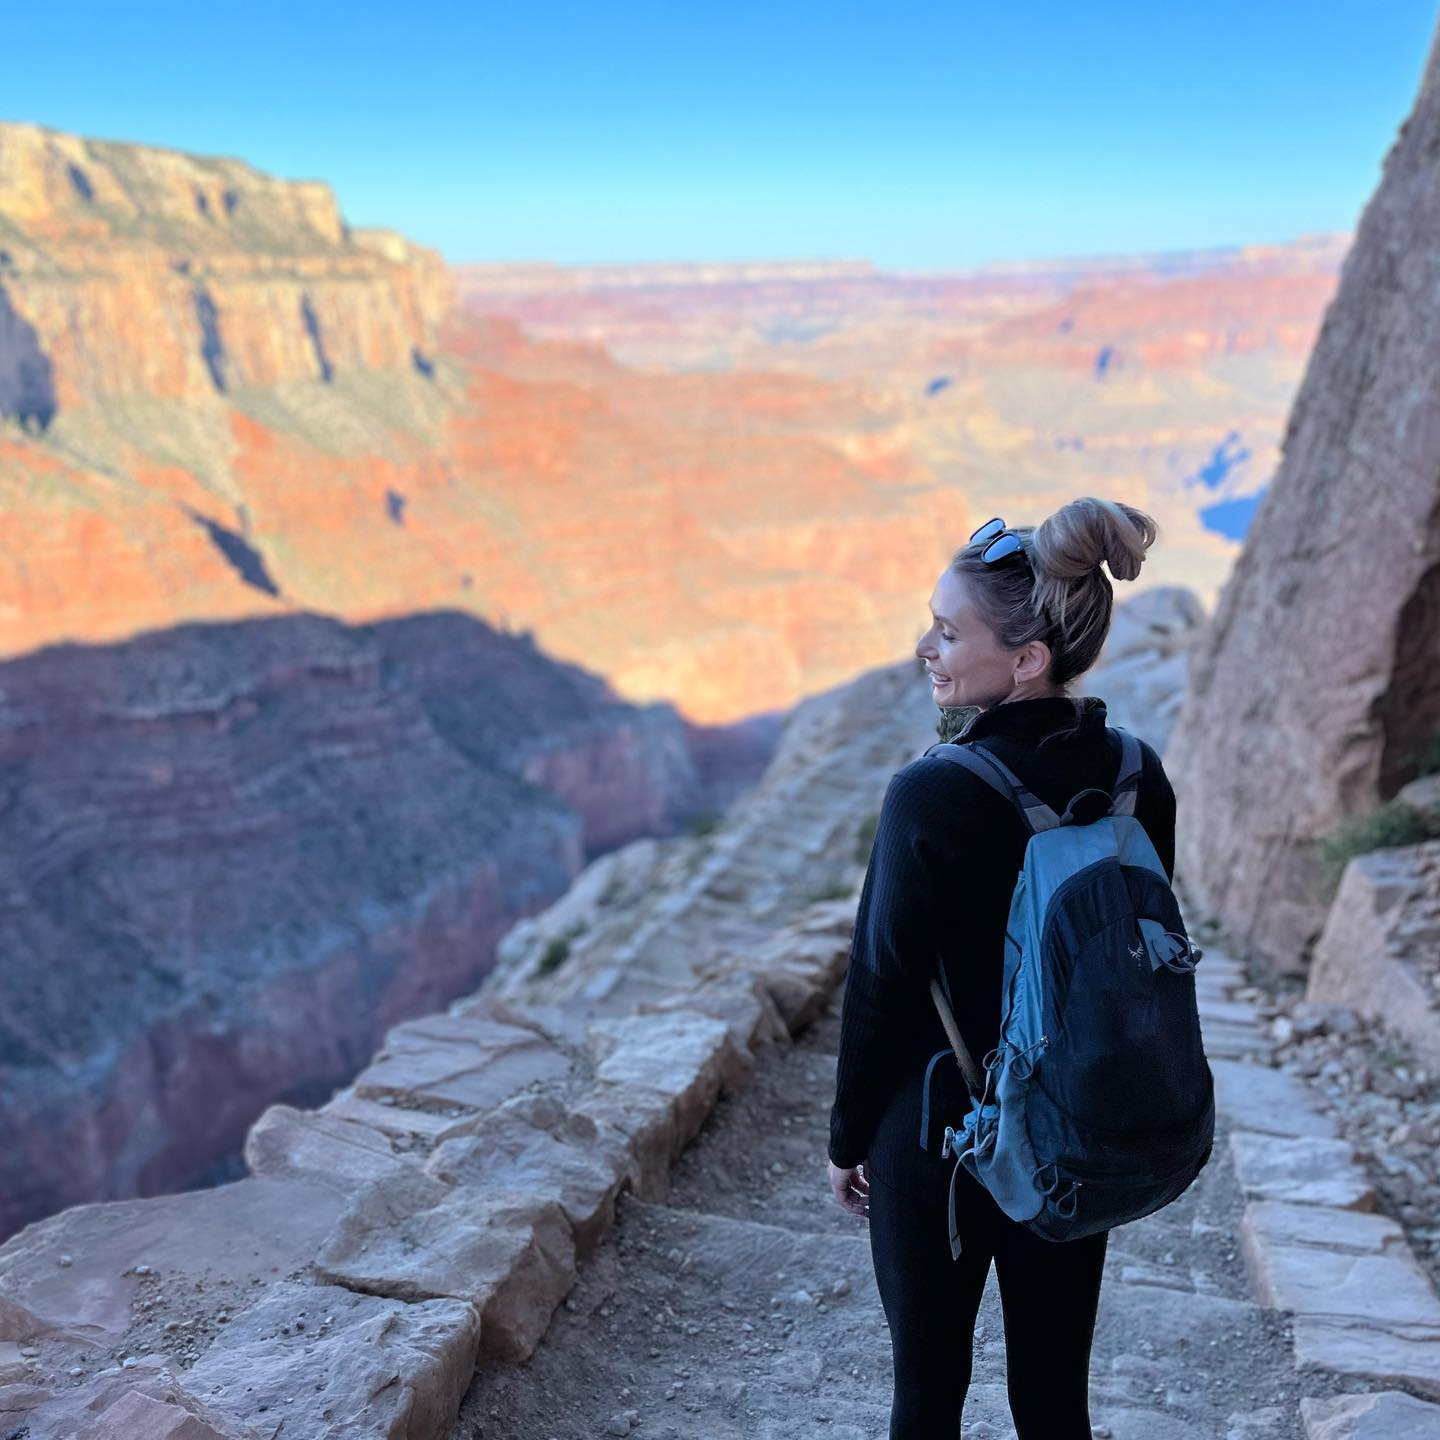 Photo dump from a truly epic weekend. Hiking the Grand Canyon down and out in 1 day…18 miles…was truly an unforgettable experience. 

#grandcanyon #grandcanyonnatonalpark #southkaibab #brightangel #phantomranch #arizona